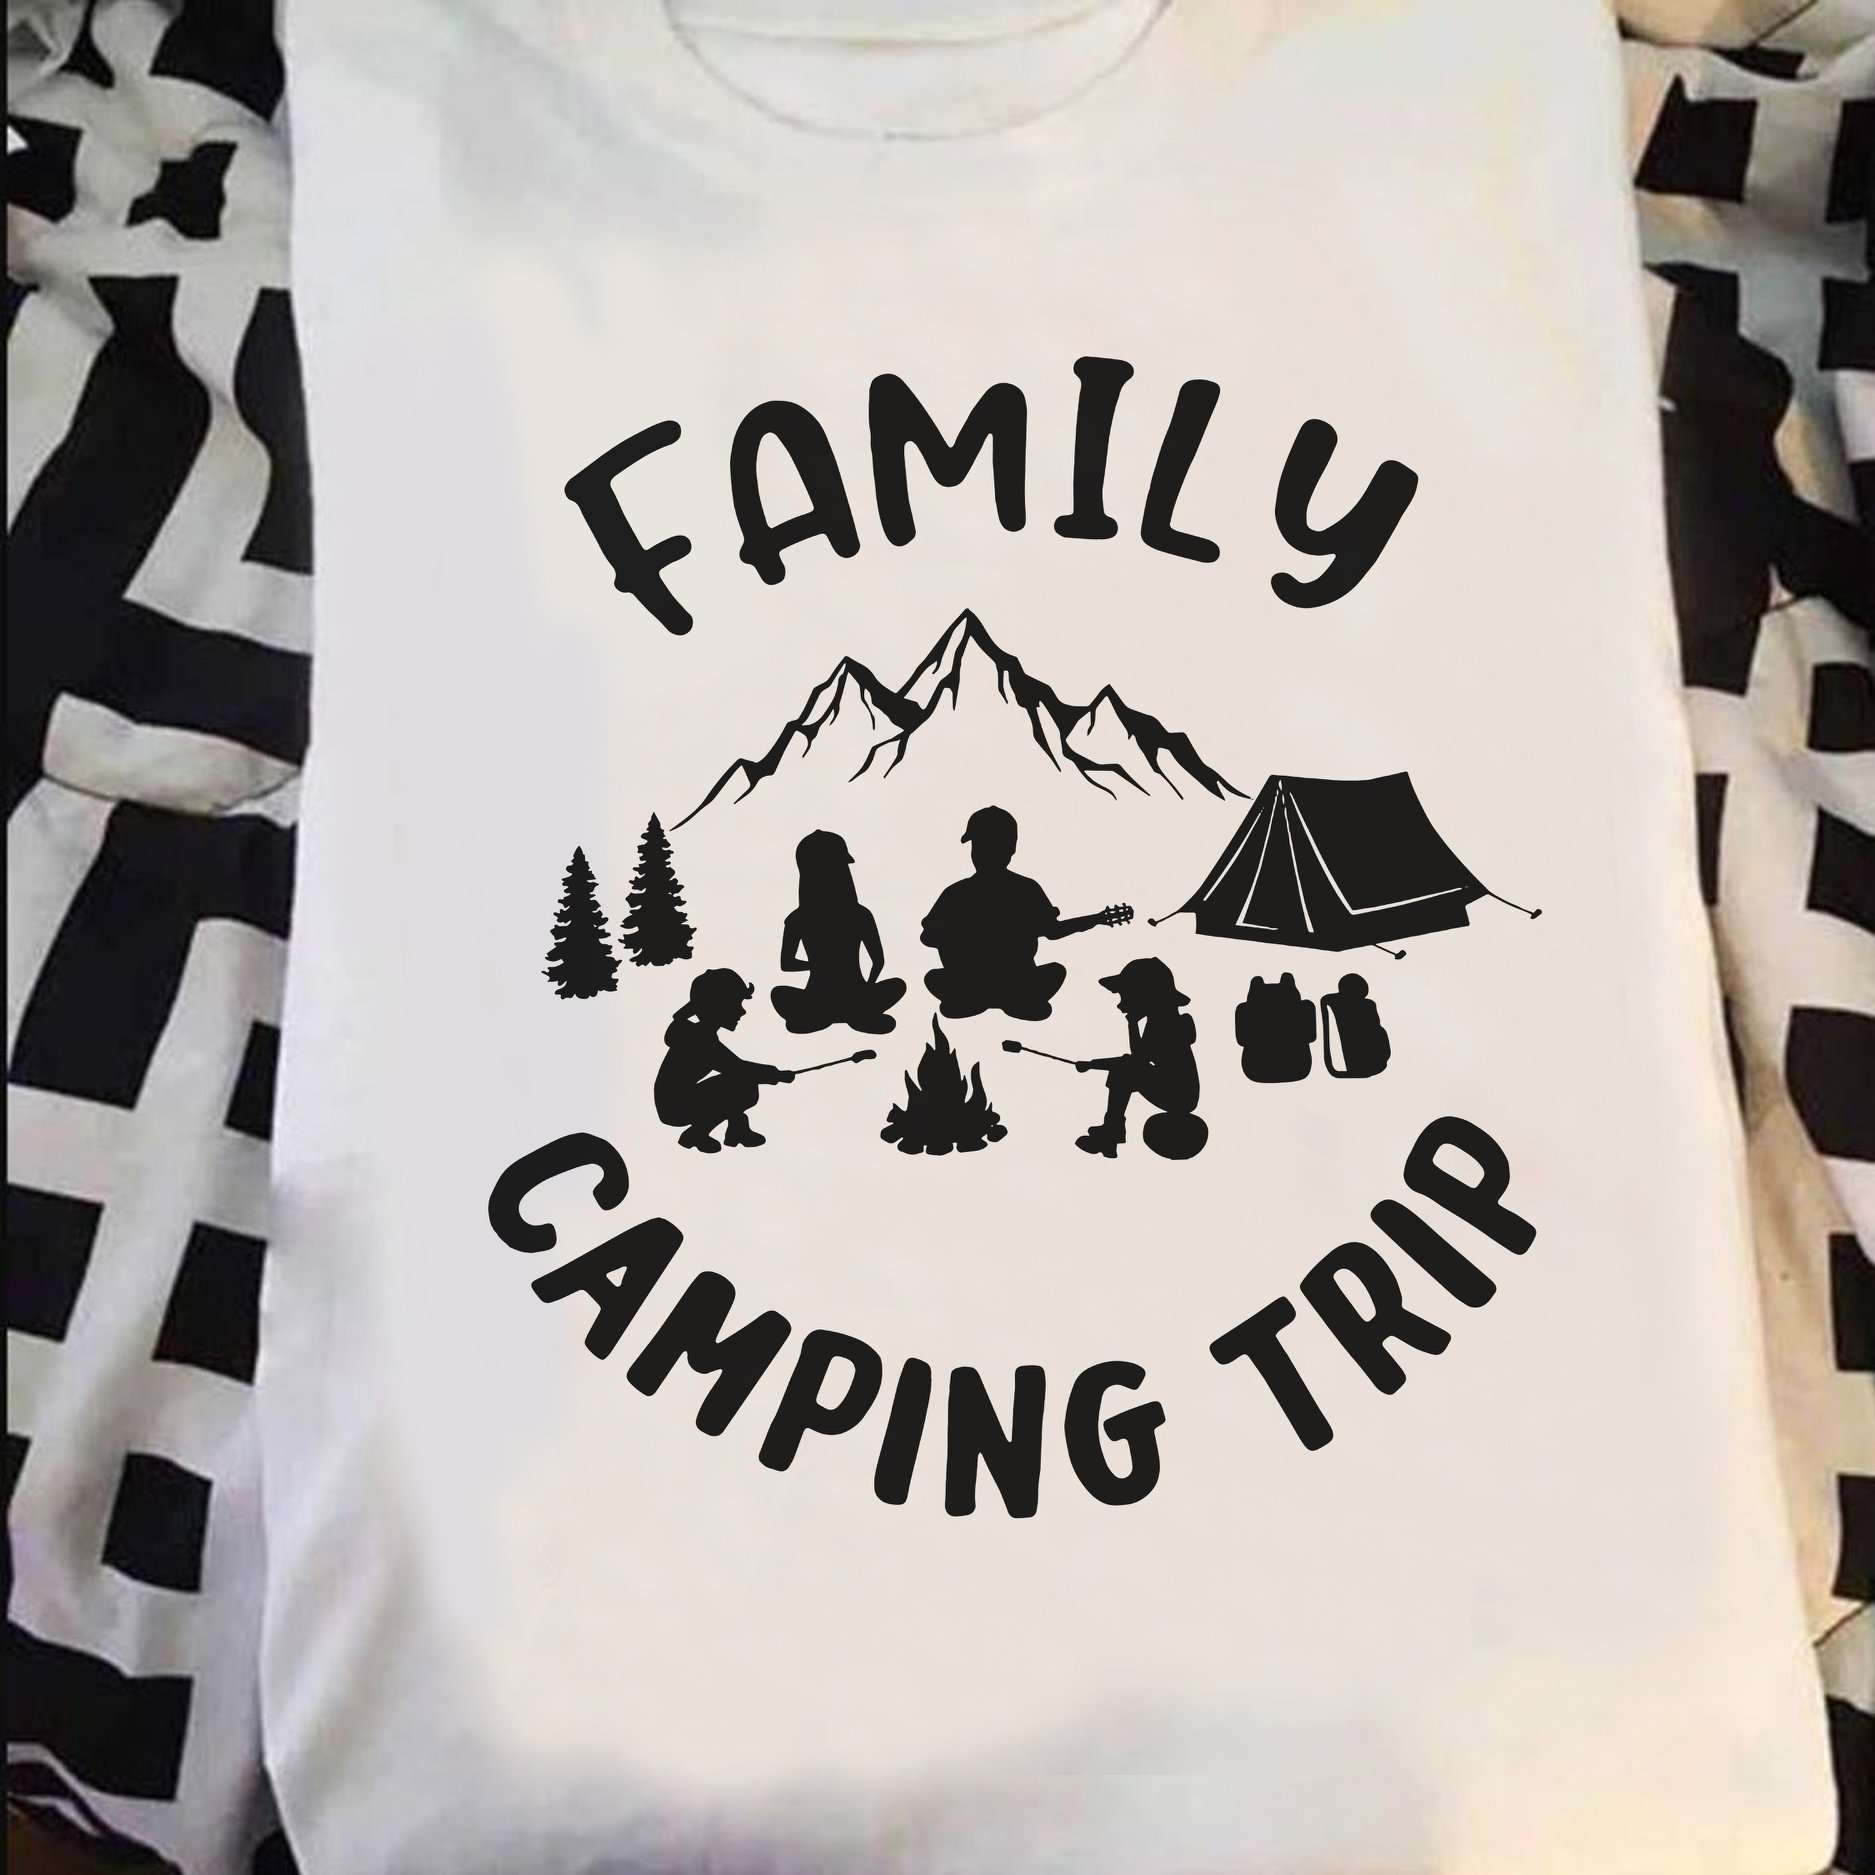 Family camping trip - Camping with family, funny camper family T-shirt